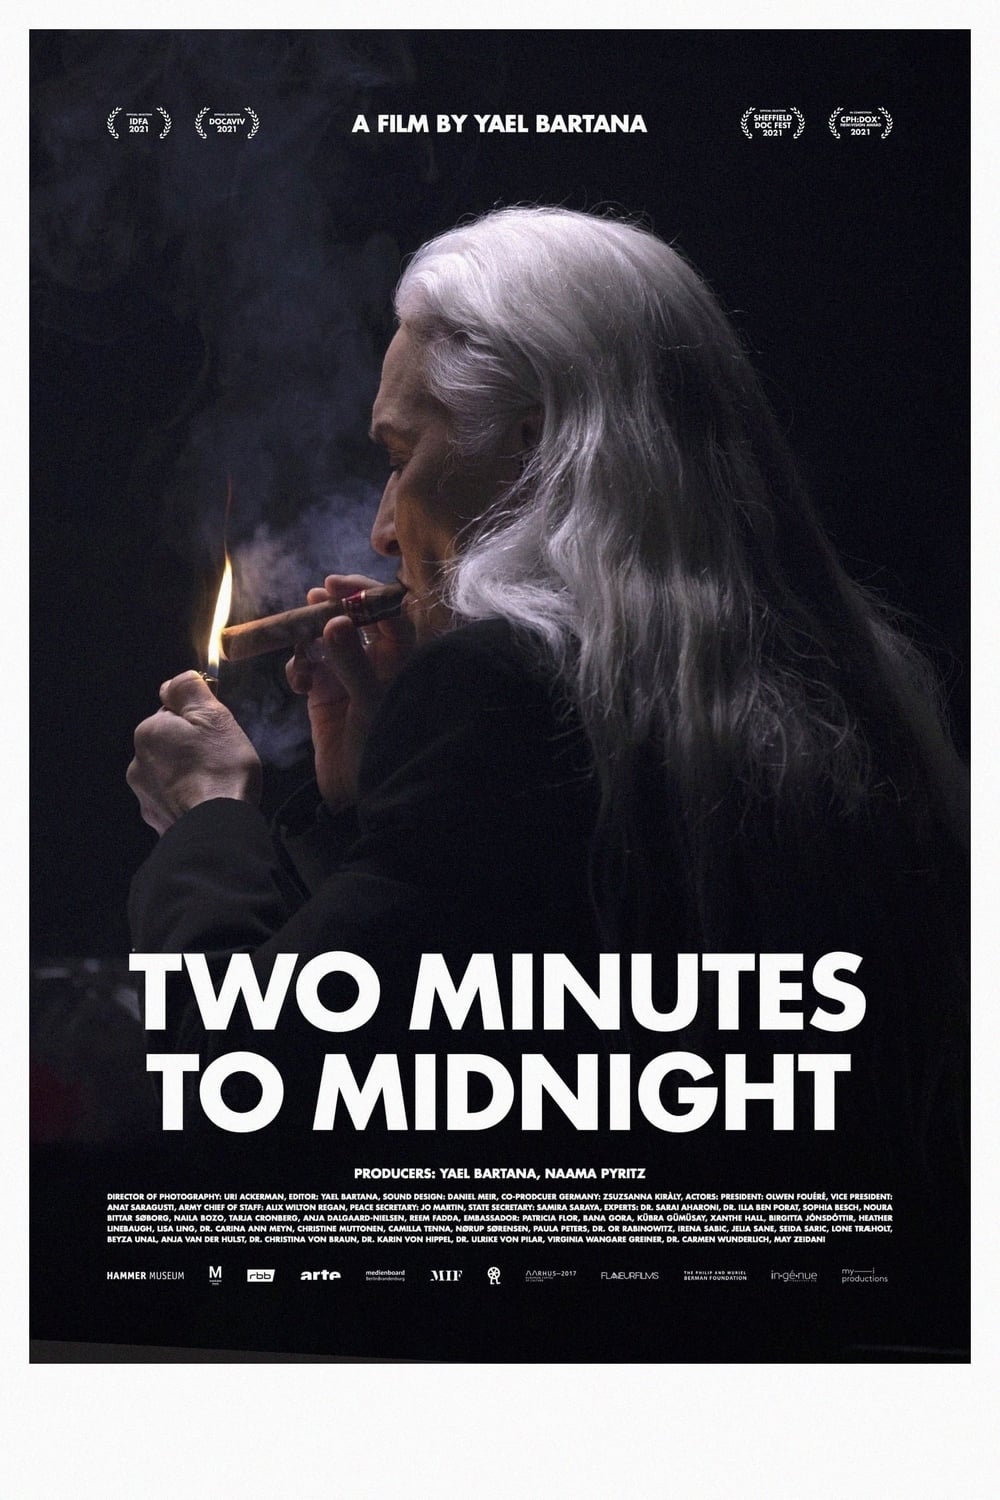 Two Minutes to Midnight